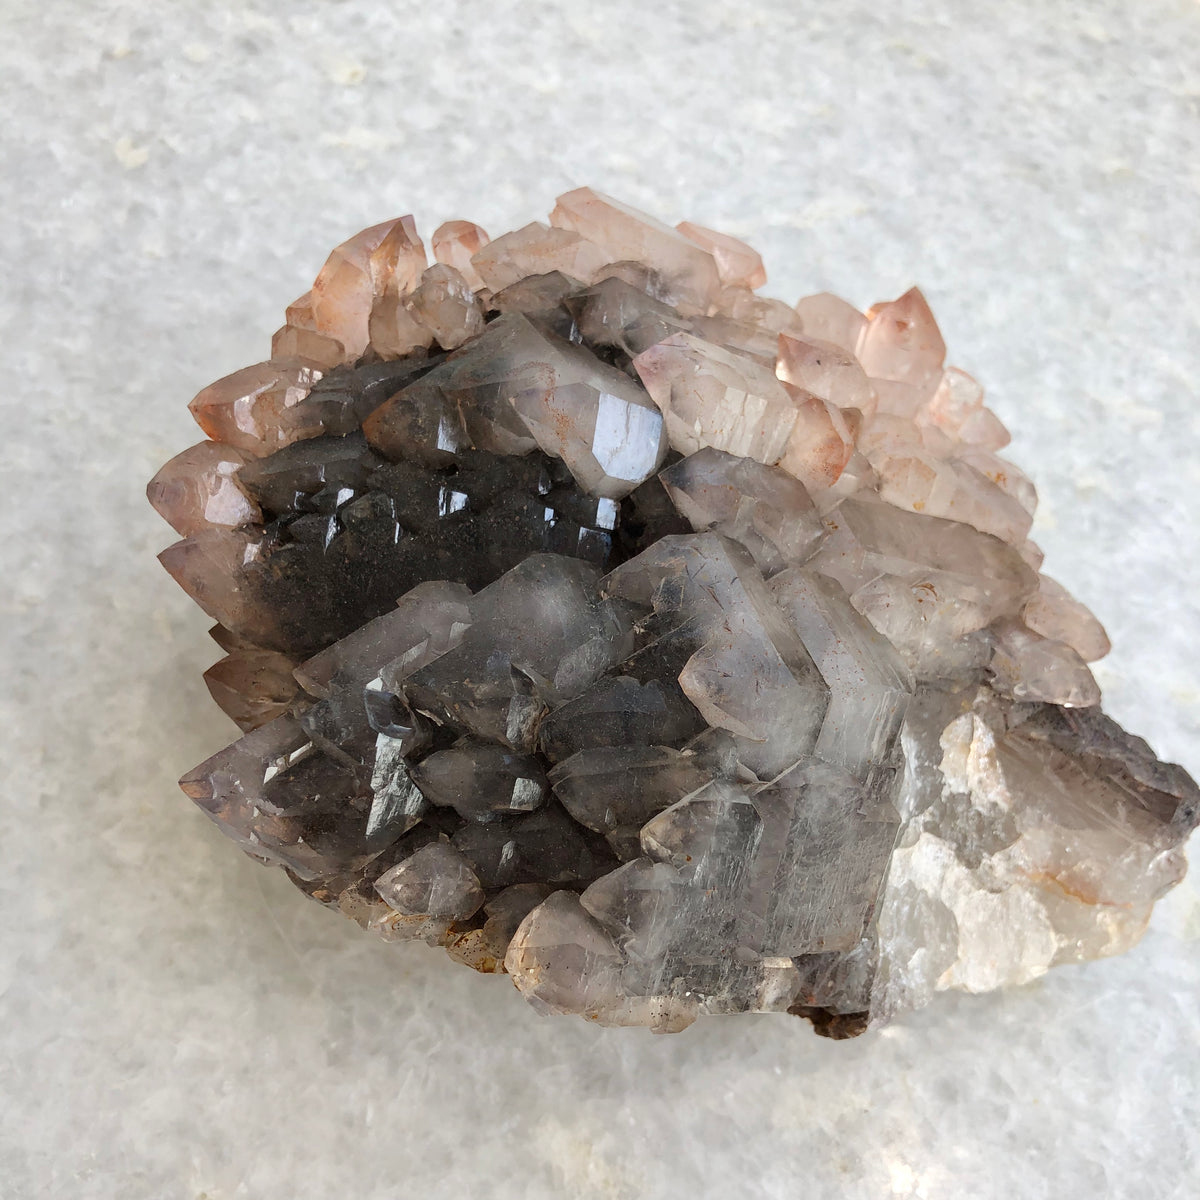 Secondary Amethyst on Hematite - Castle at Dawn